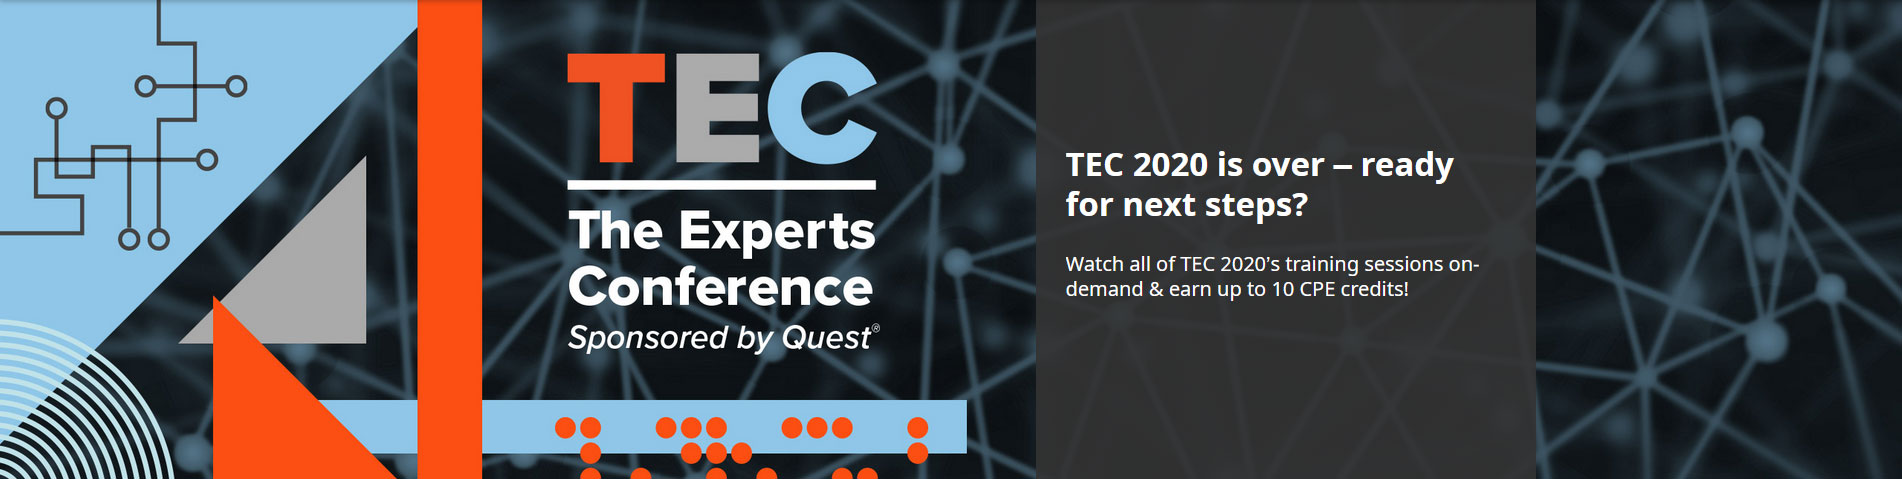 The Experts Conference